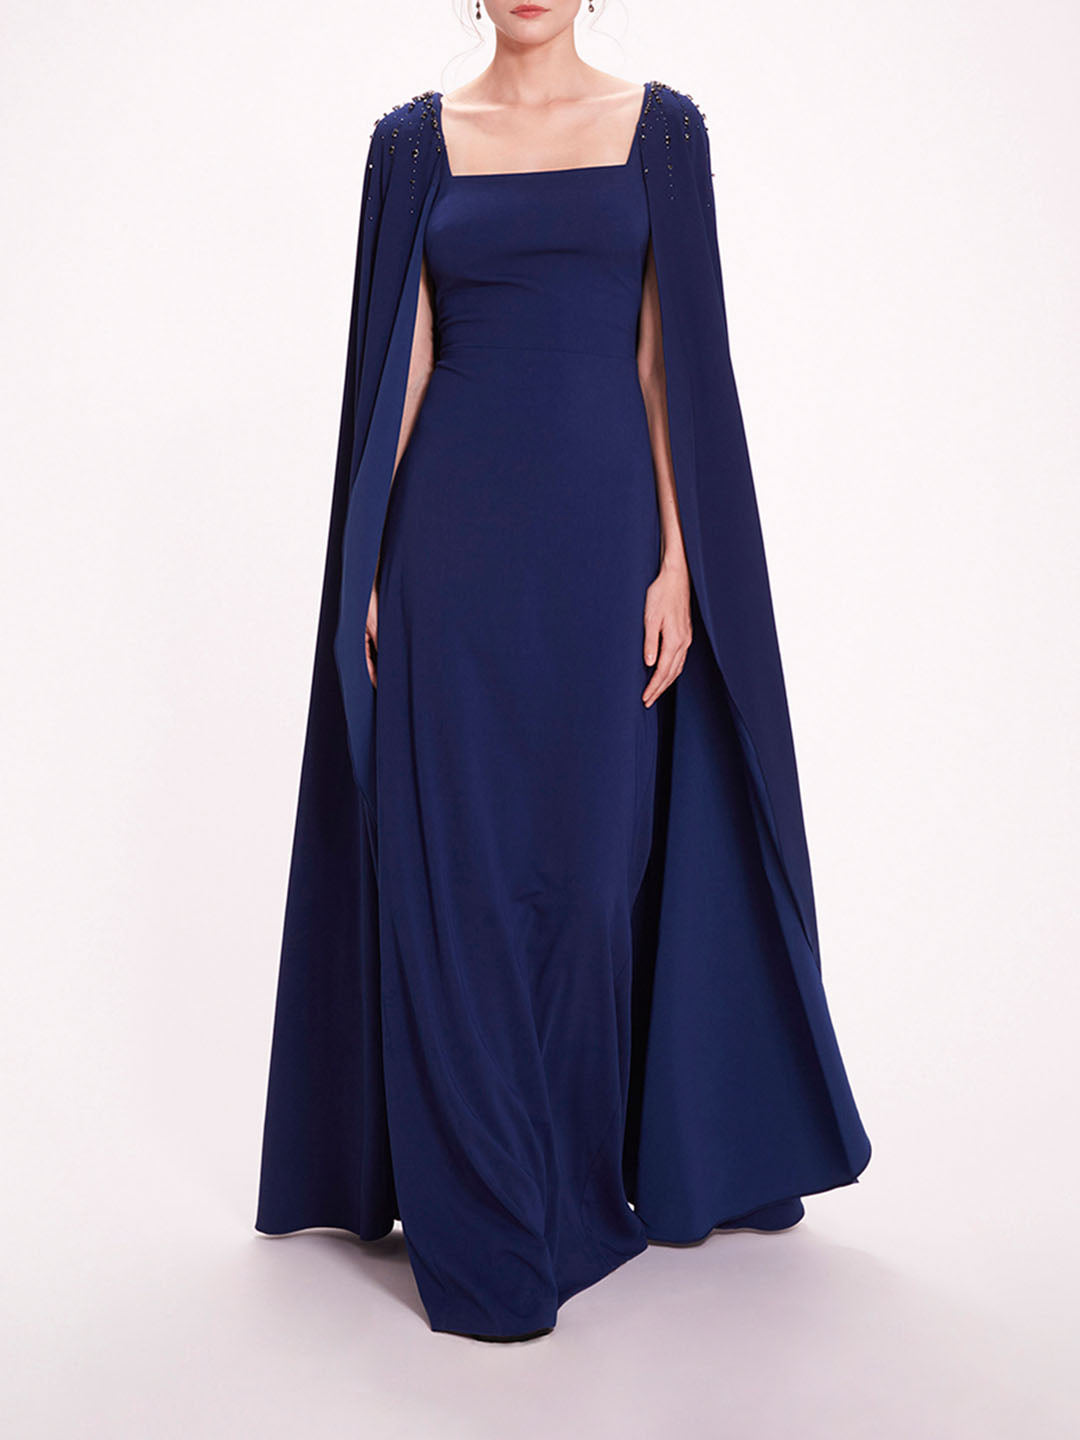 Embellished Cape Gown | Marchesa